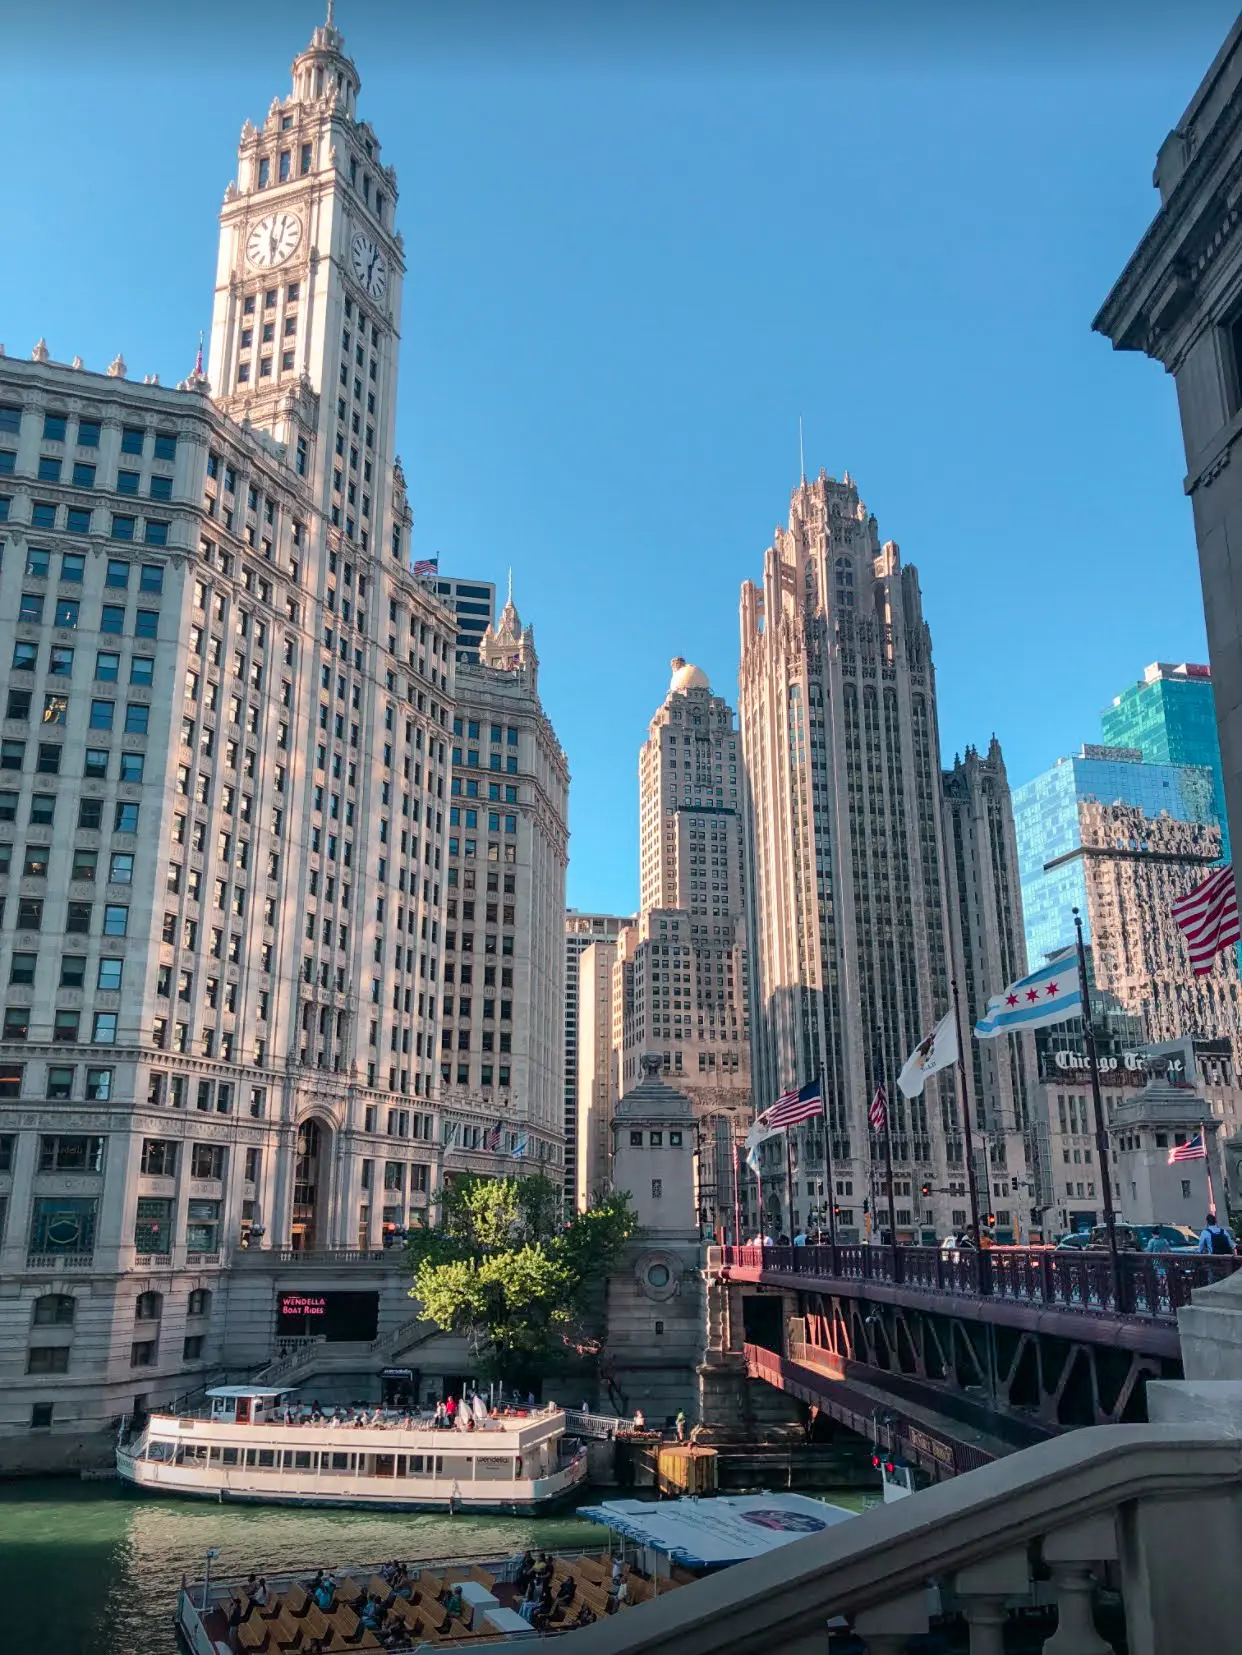 Riverwalk looking out over the mighty Wrigley building, a boat and the burgundy DuSable Bridge, a must during your weekend in Chicago.